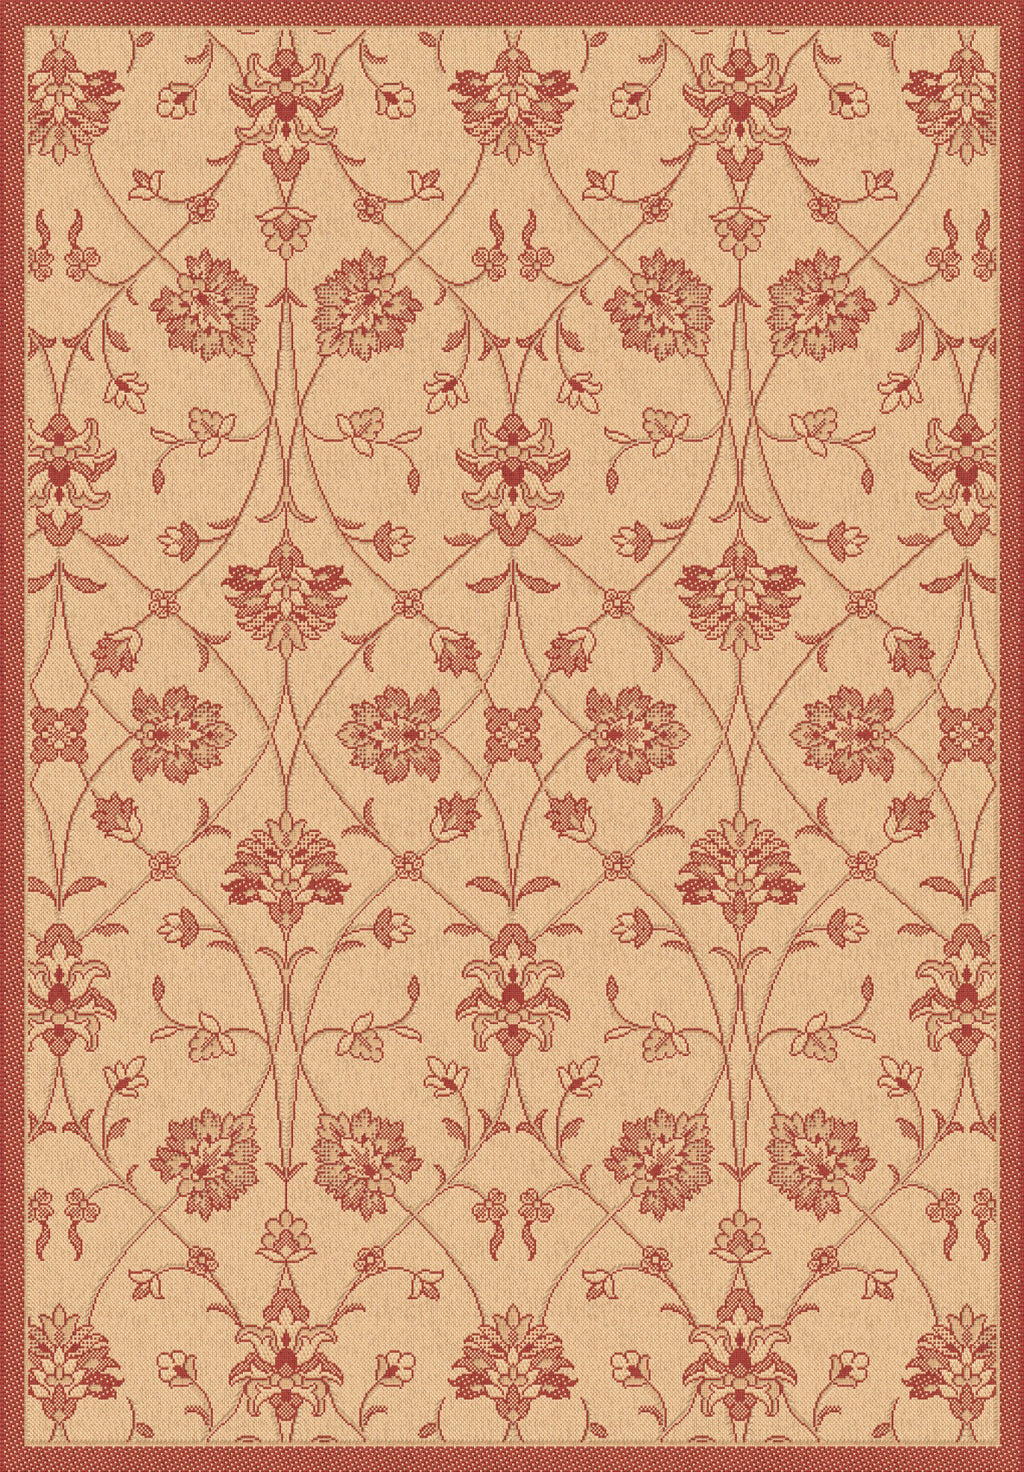 Dynamic Rugs Piazza 2744 Natural/Red Area Rug main image